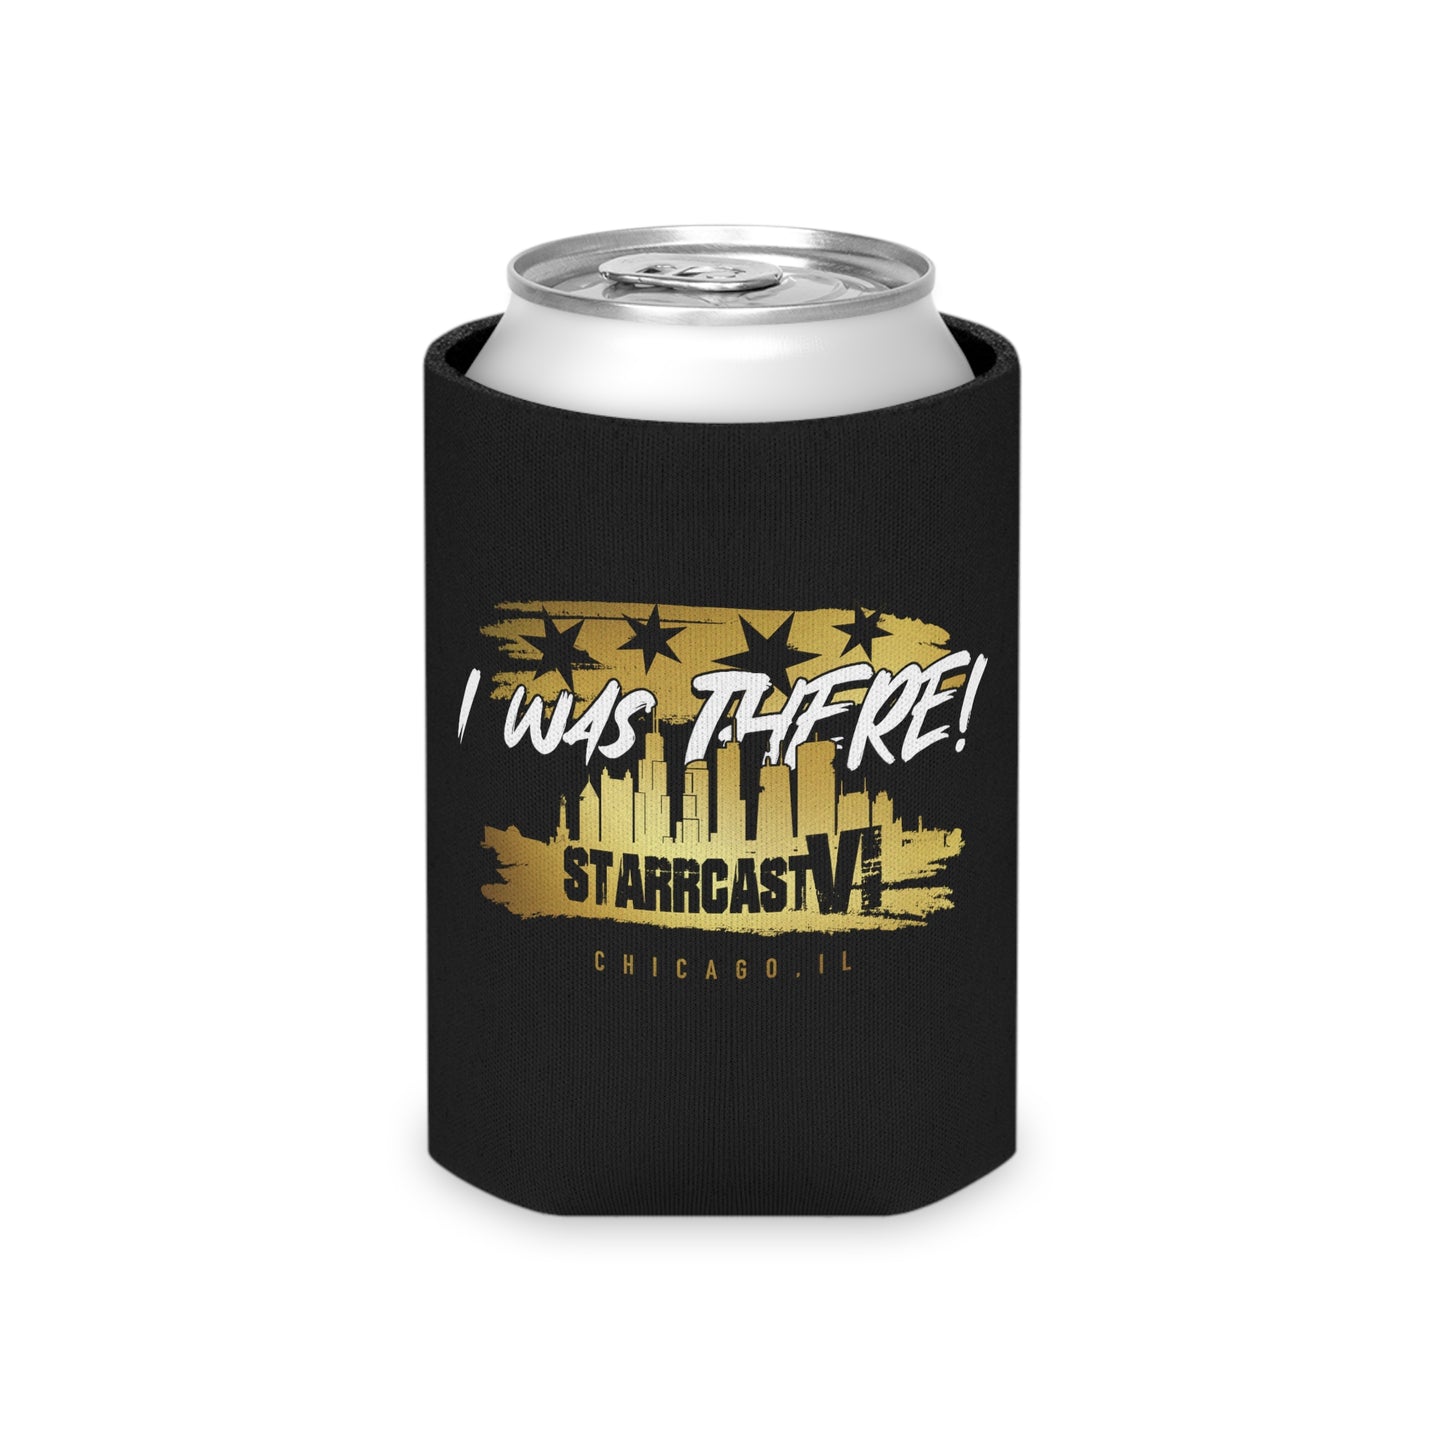 Starrcast VI "I Was There" Black- Can Cooler